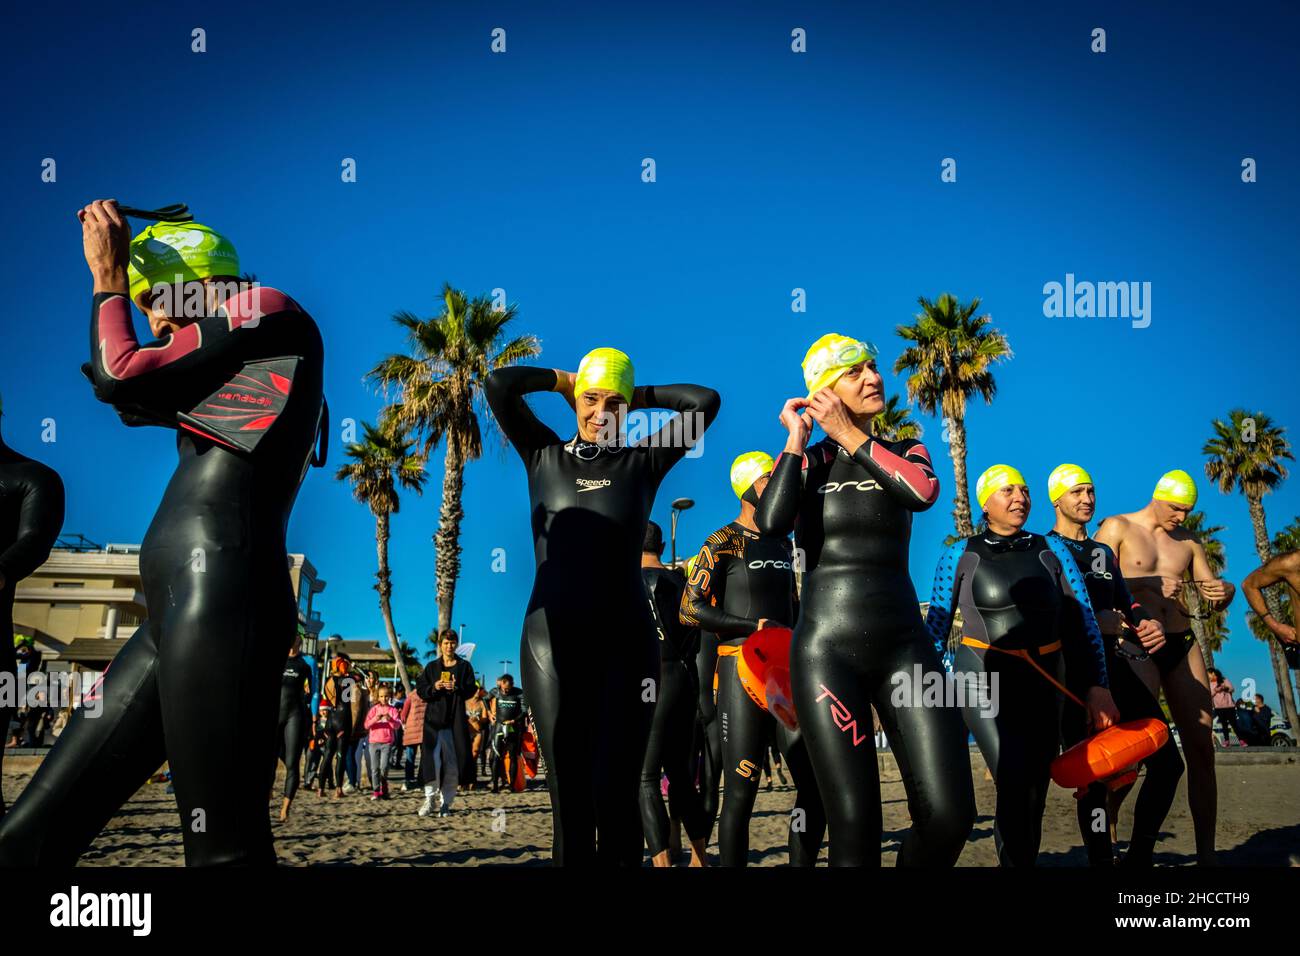 Valencia, Spain; 12th December 2021: Swimmers celebrating a winter crossing during the New Normal Stock Photo